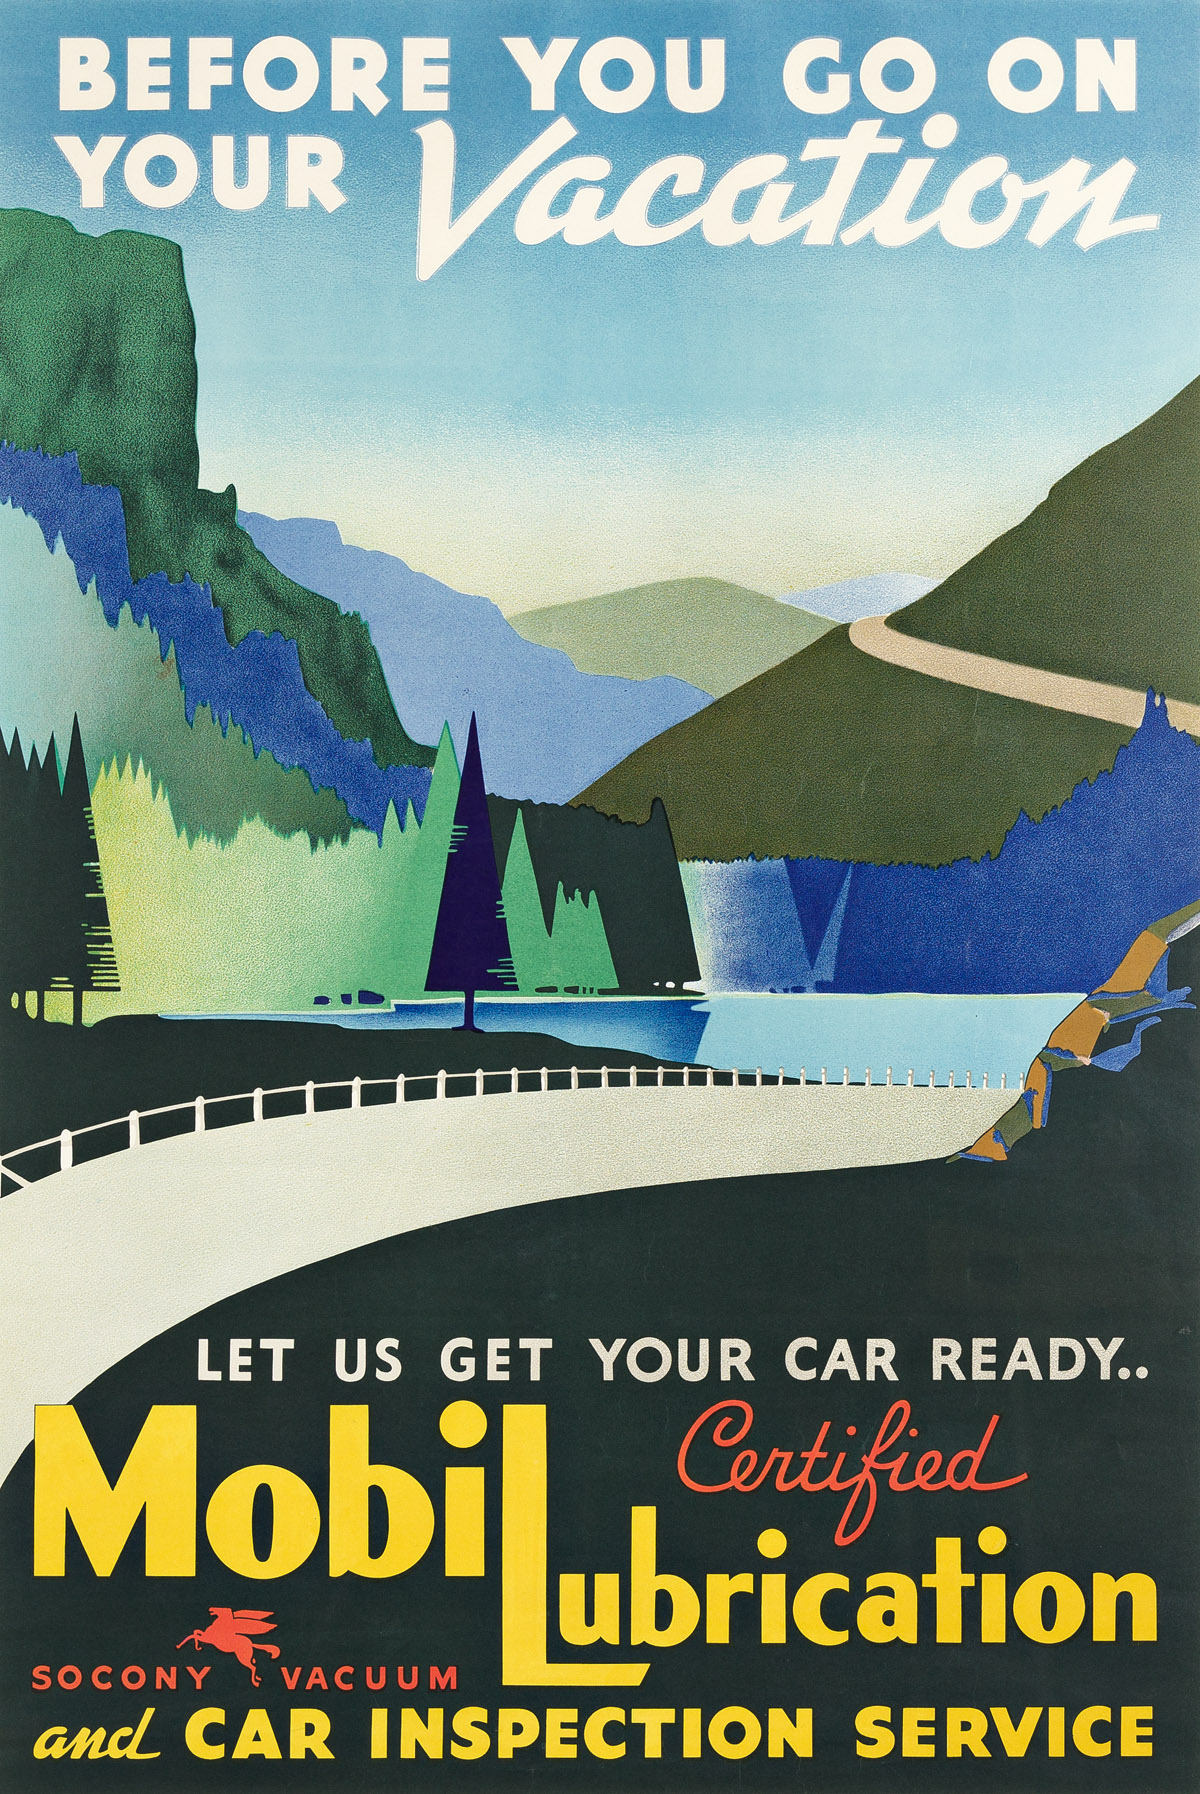 DESIGNER UNKNOWN.  BEFORE YOU GO ON VACATION / MOBILUBRICATION. Circa 1940s. 39x26¼ inches, 99x66¾ cm. Sweeney Litho Co., Inc., Bellevi